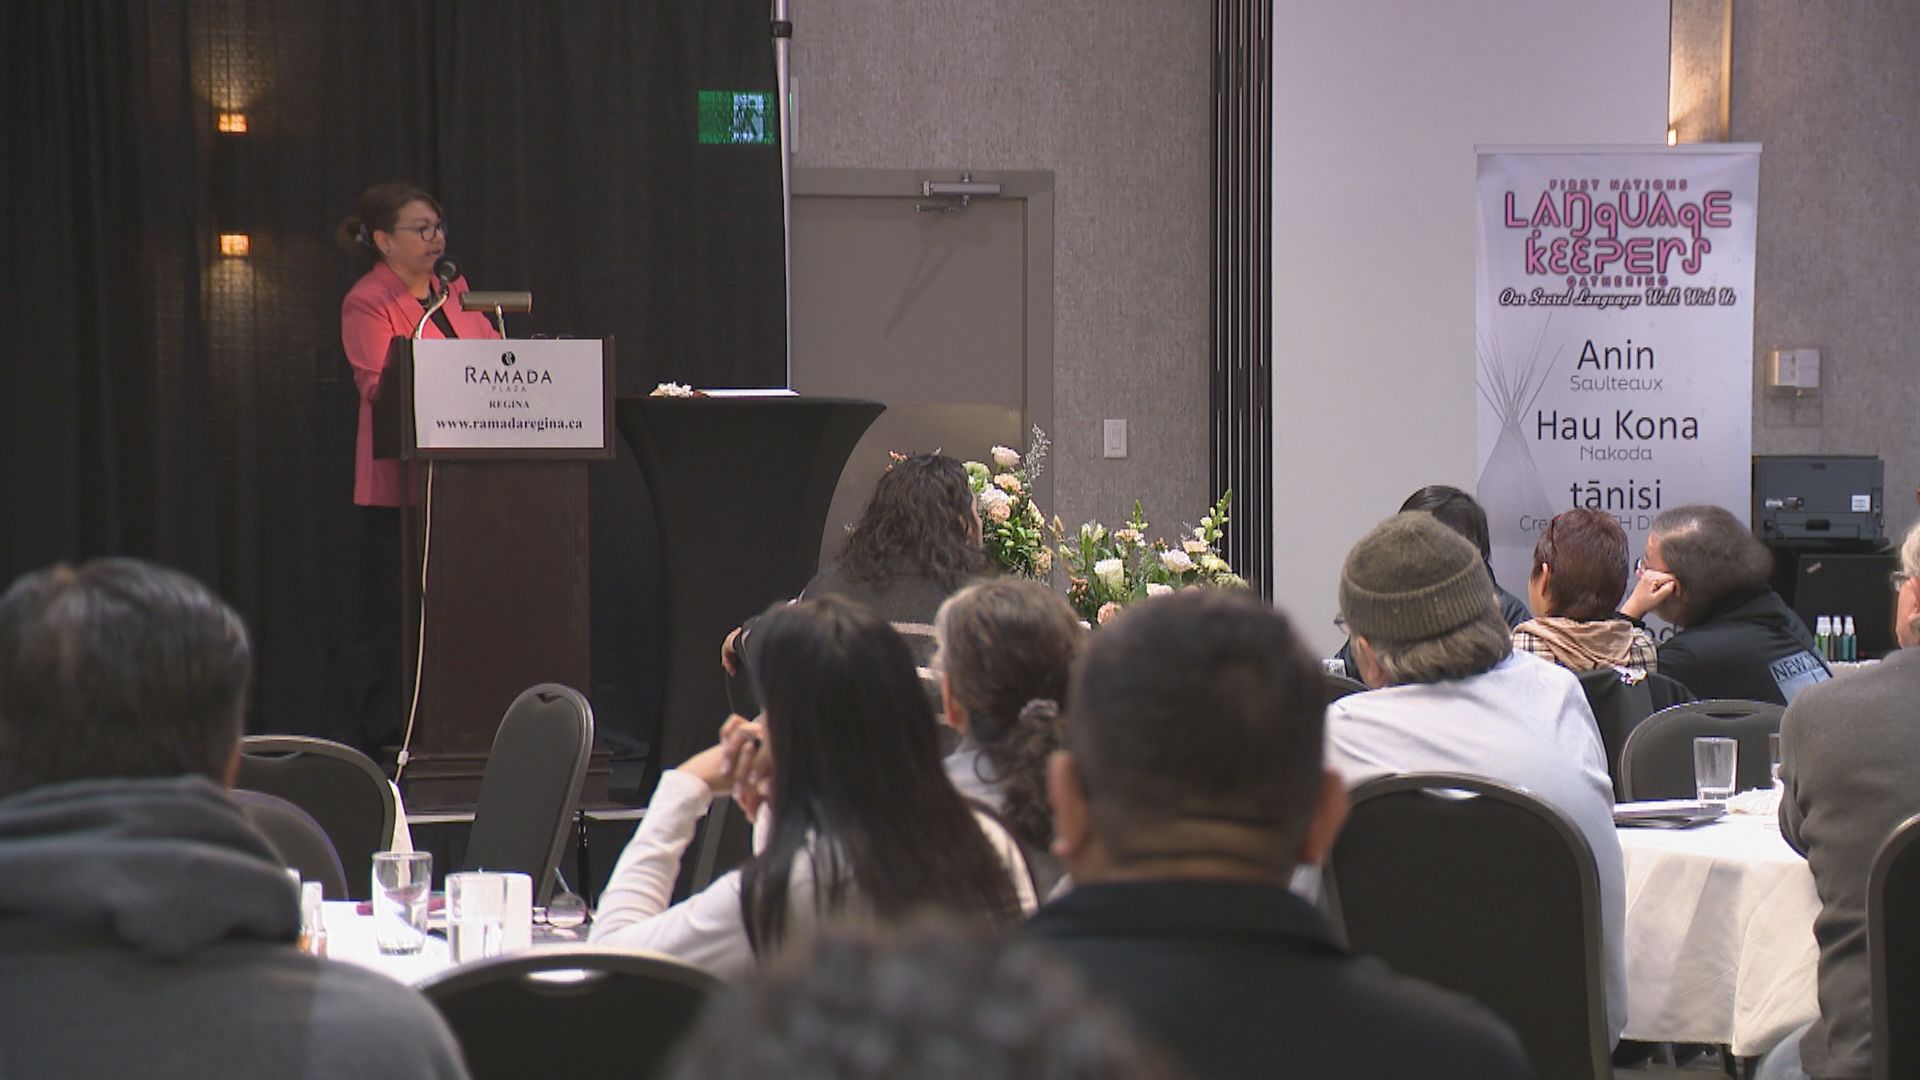 Indigenous languages ‘are really suffering right now’ heard at Regina gathering